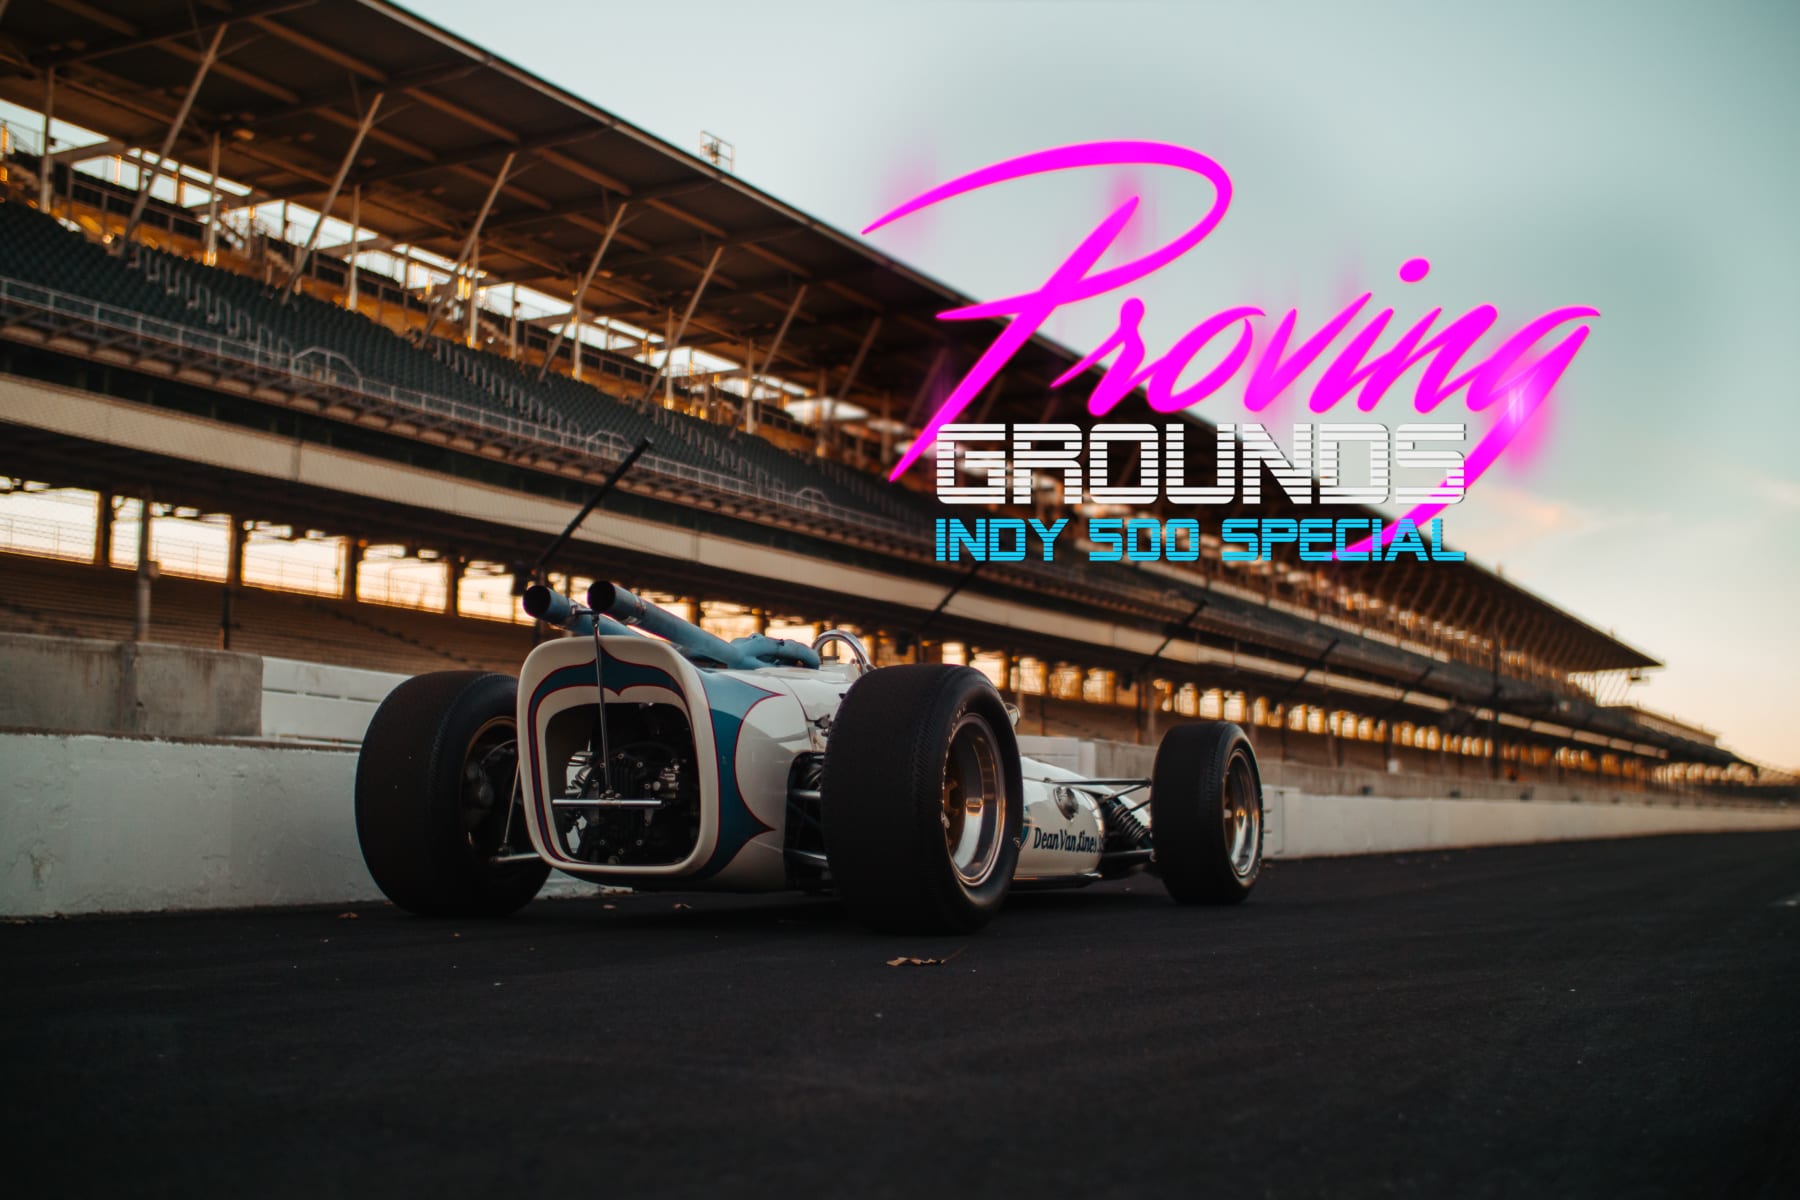 Proving Grounds Indy 500 Special